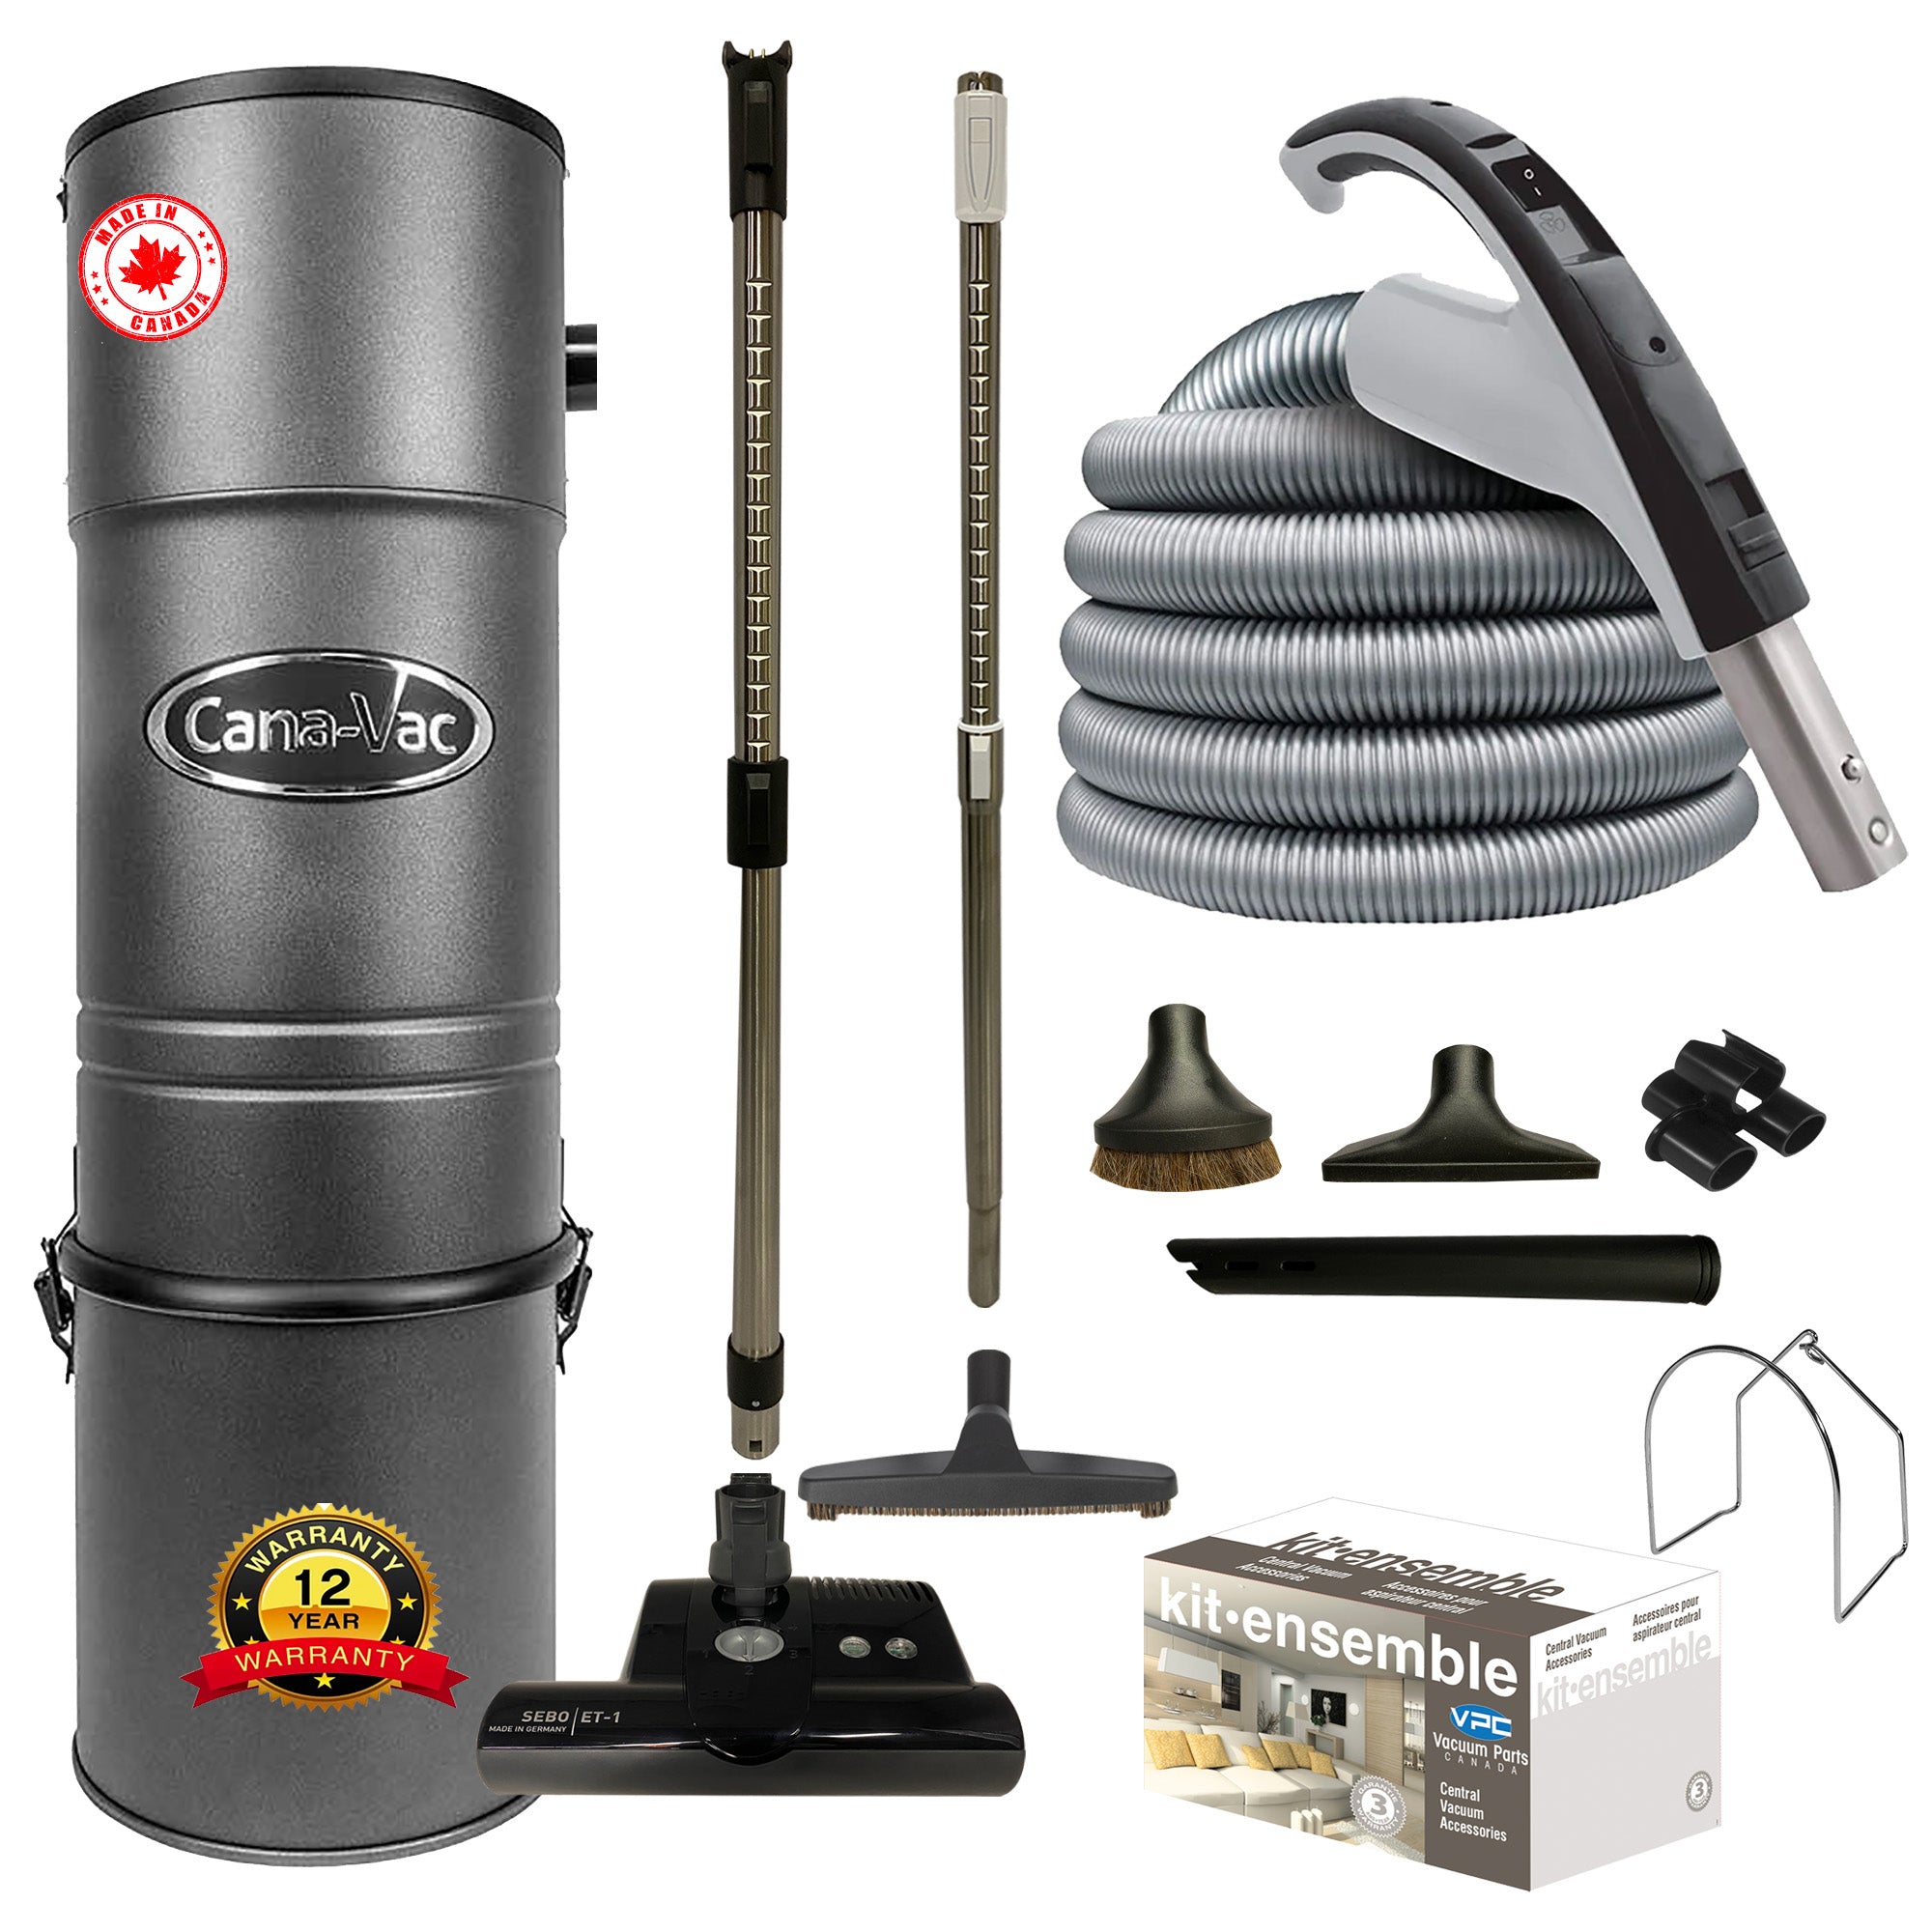 CanaVac CV687 Central Vacuum with Premium Electric Package